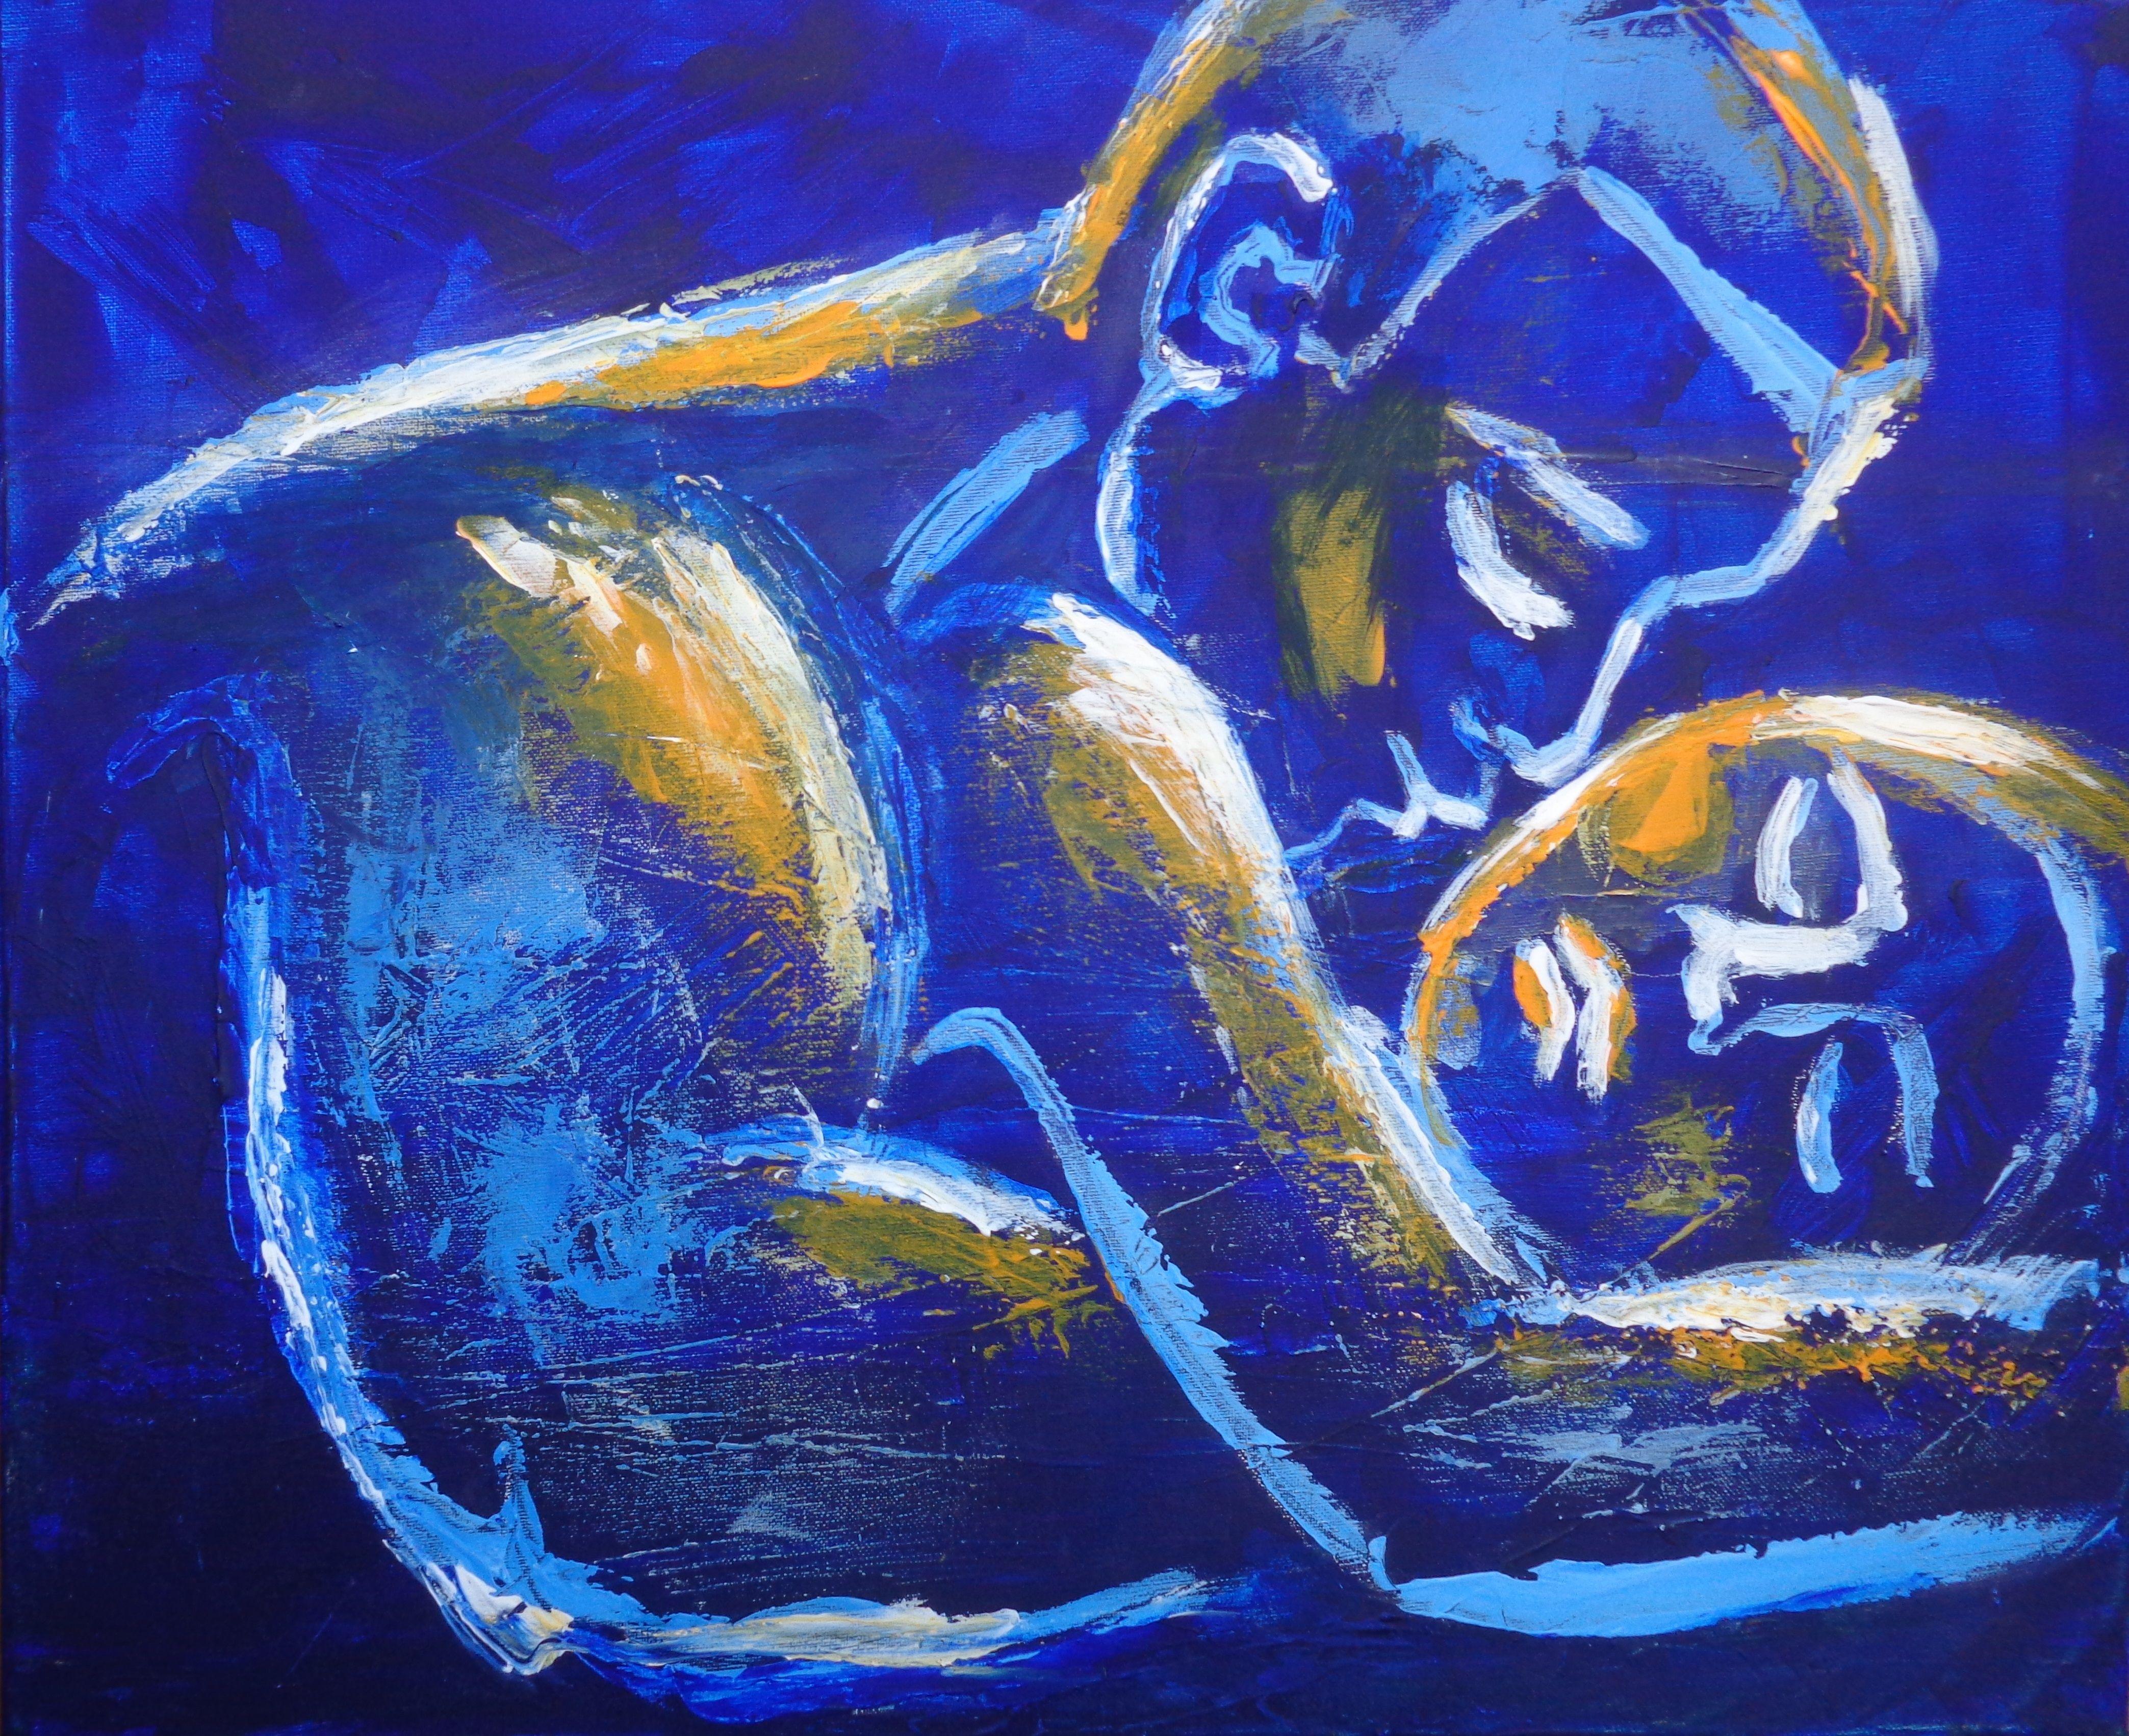 The sixth artwork in the series "Night of Passion". Painted with simple   line marks in blue, orange and white colours, enough to suggest shapes in the darkness. Powerful  image of an embraced couple in love. Original figurative painting on canvas,